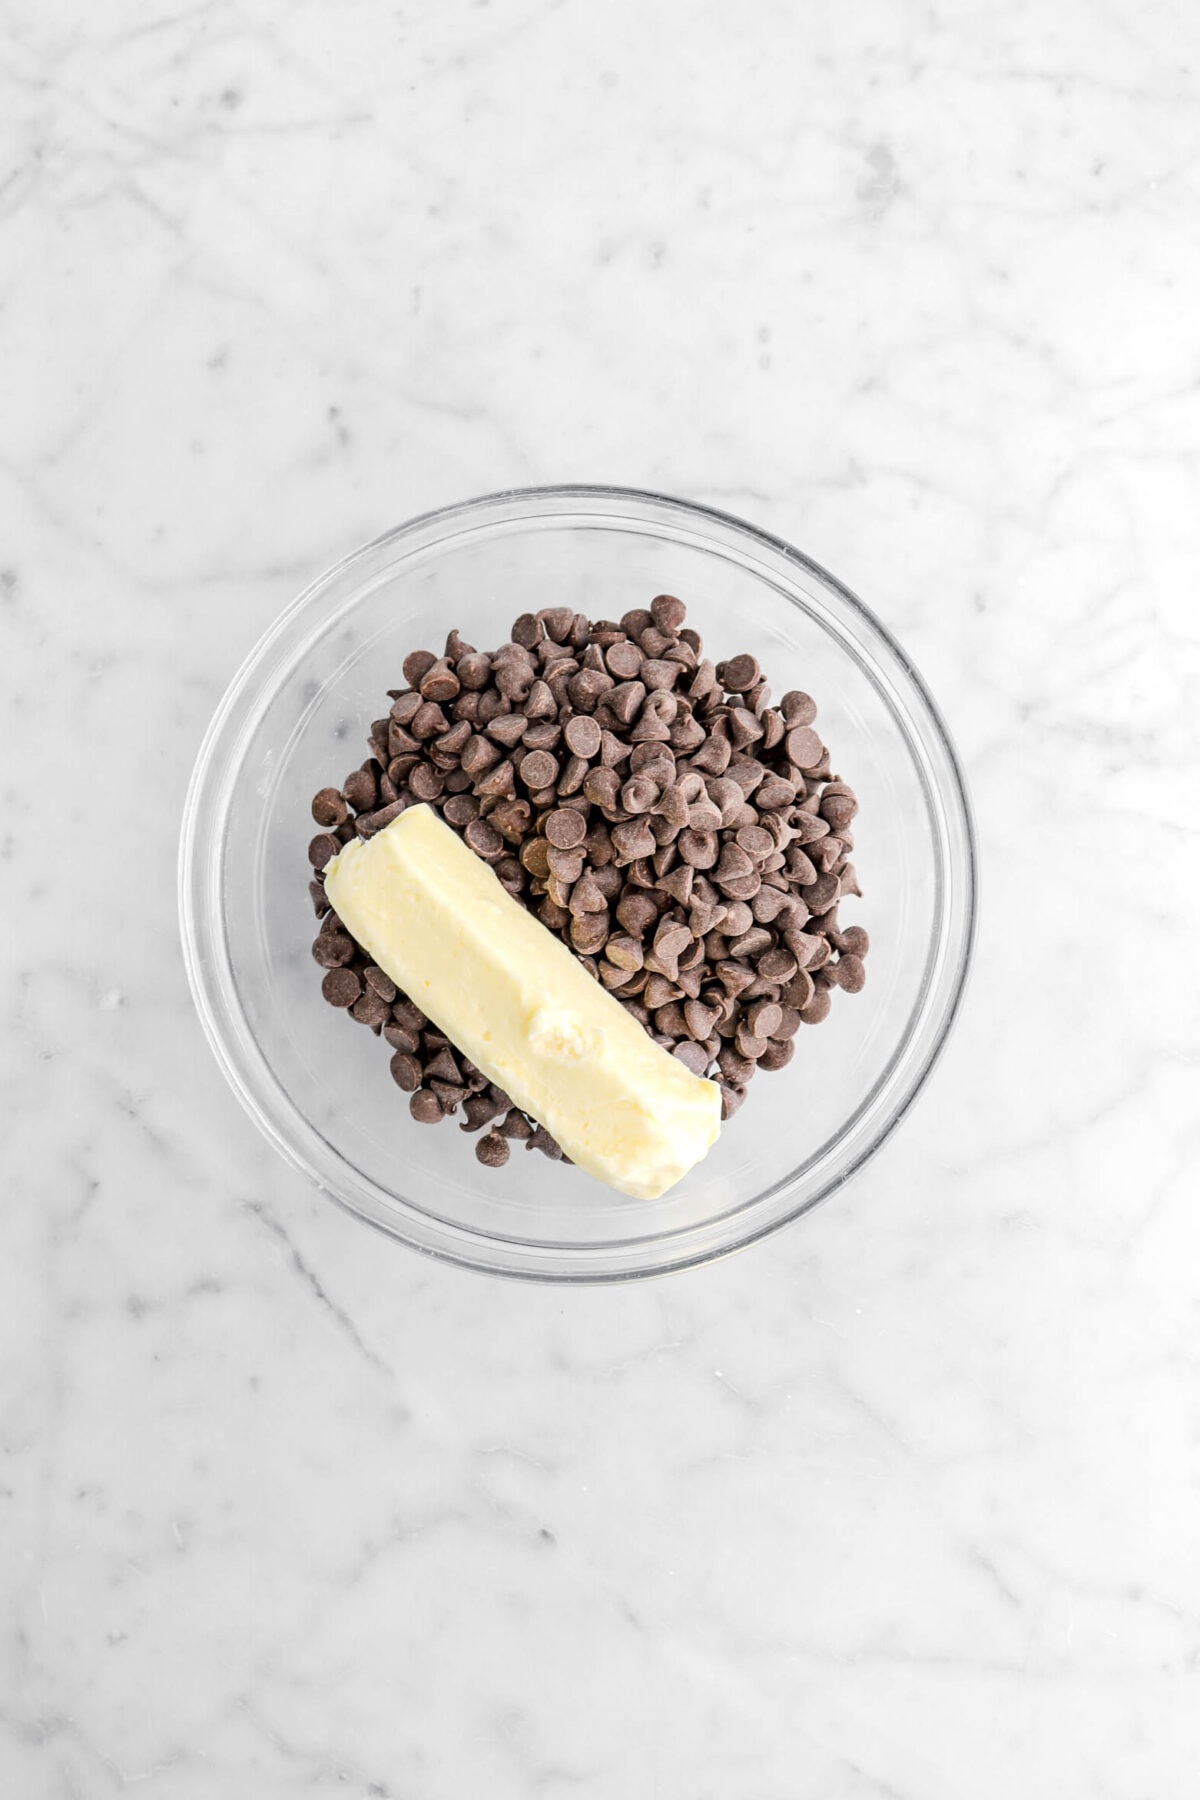 butter and chocolate chips in glass bowl.